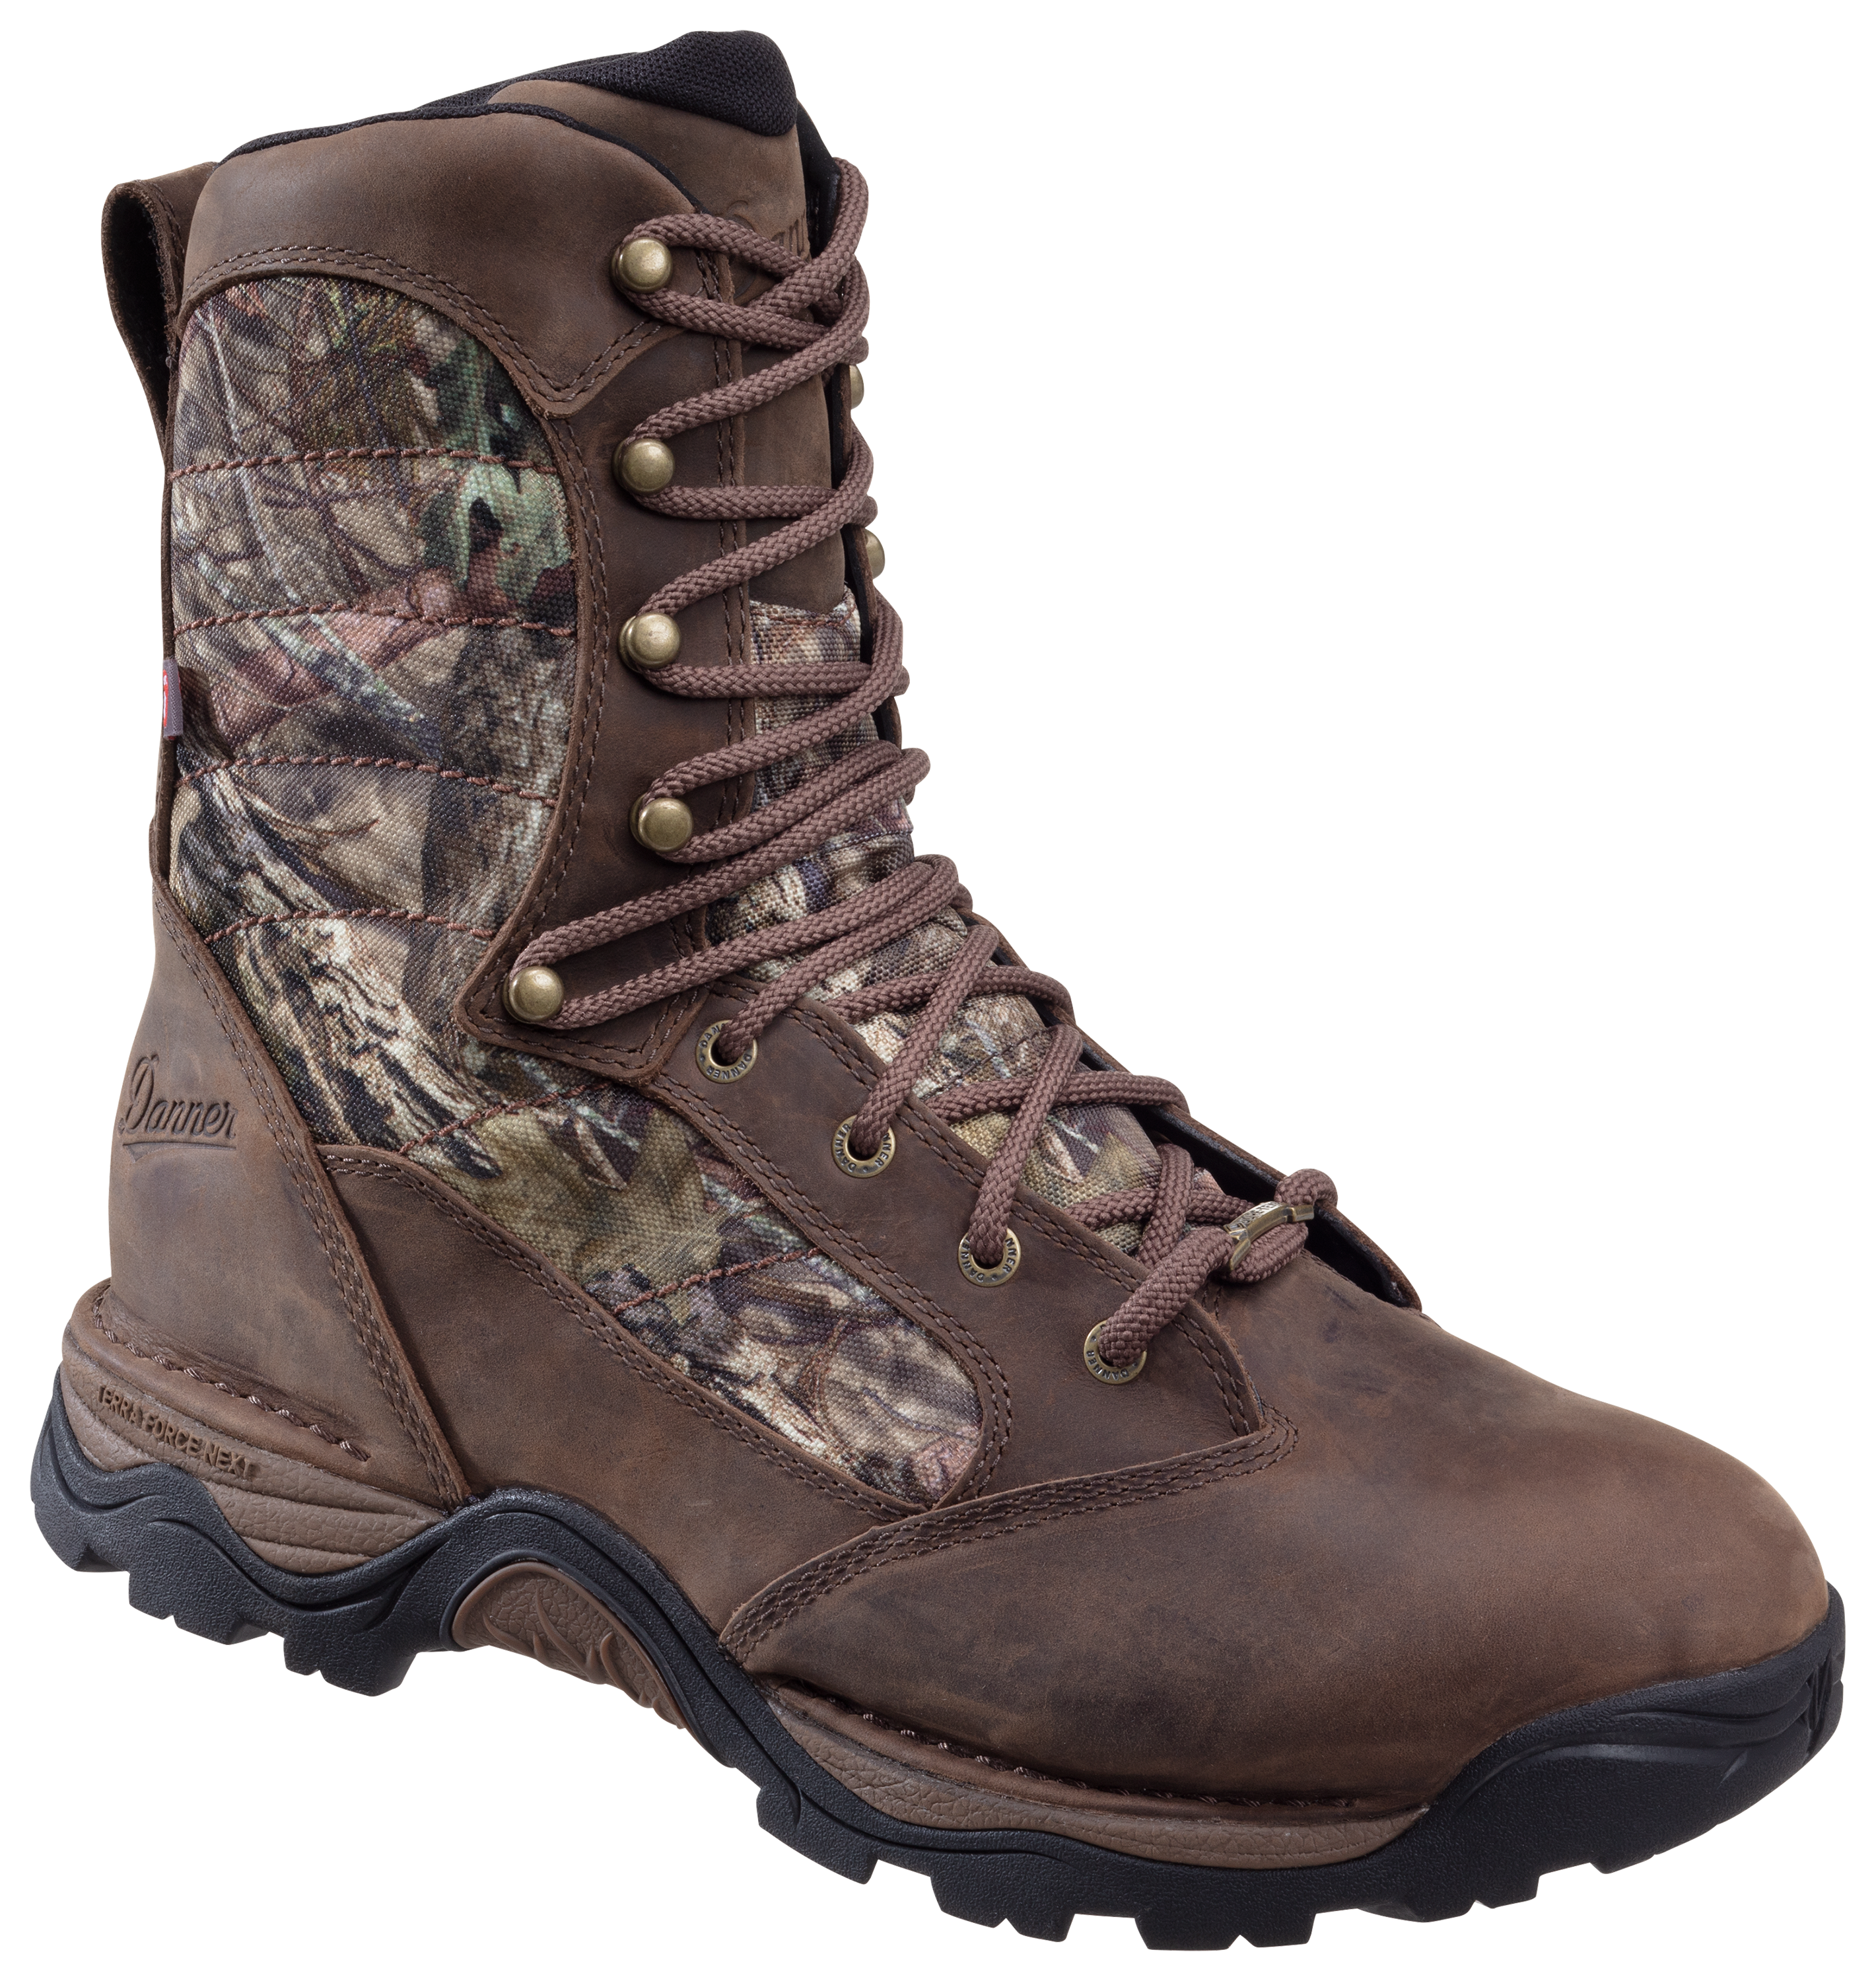 Danner Pronghorn 800 Insulated GORE-TEX Hunting Boots for Men - Mossy Oak Break-Up Country - 9.5M